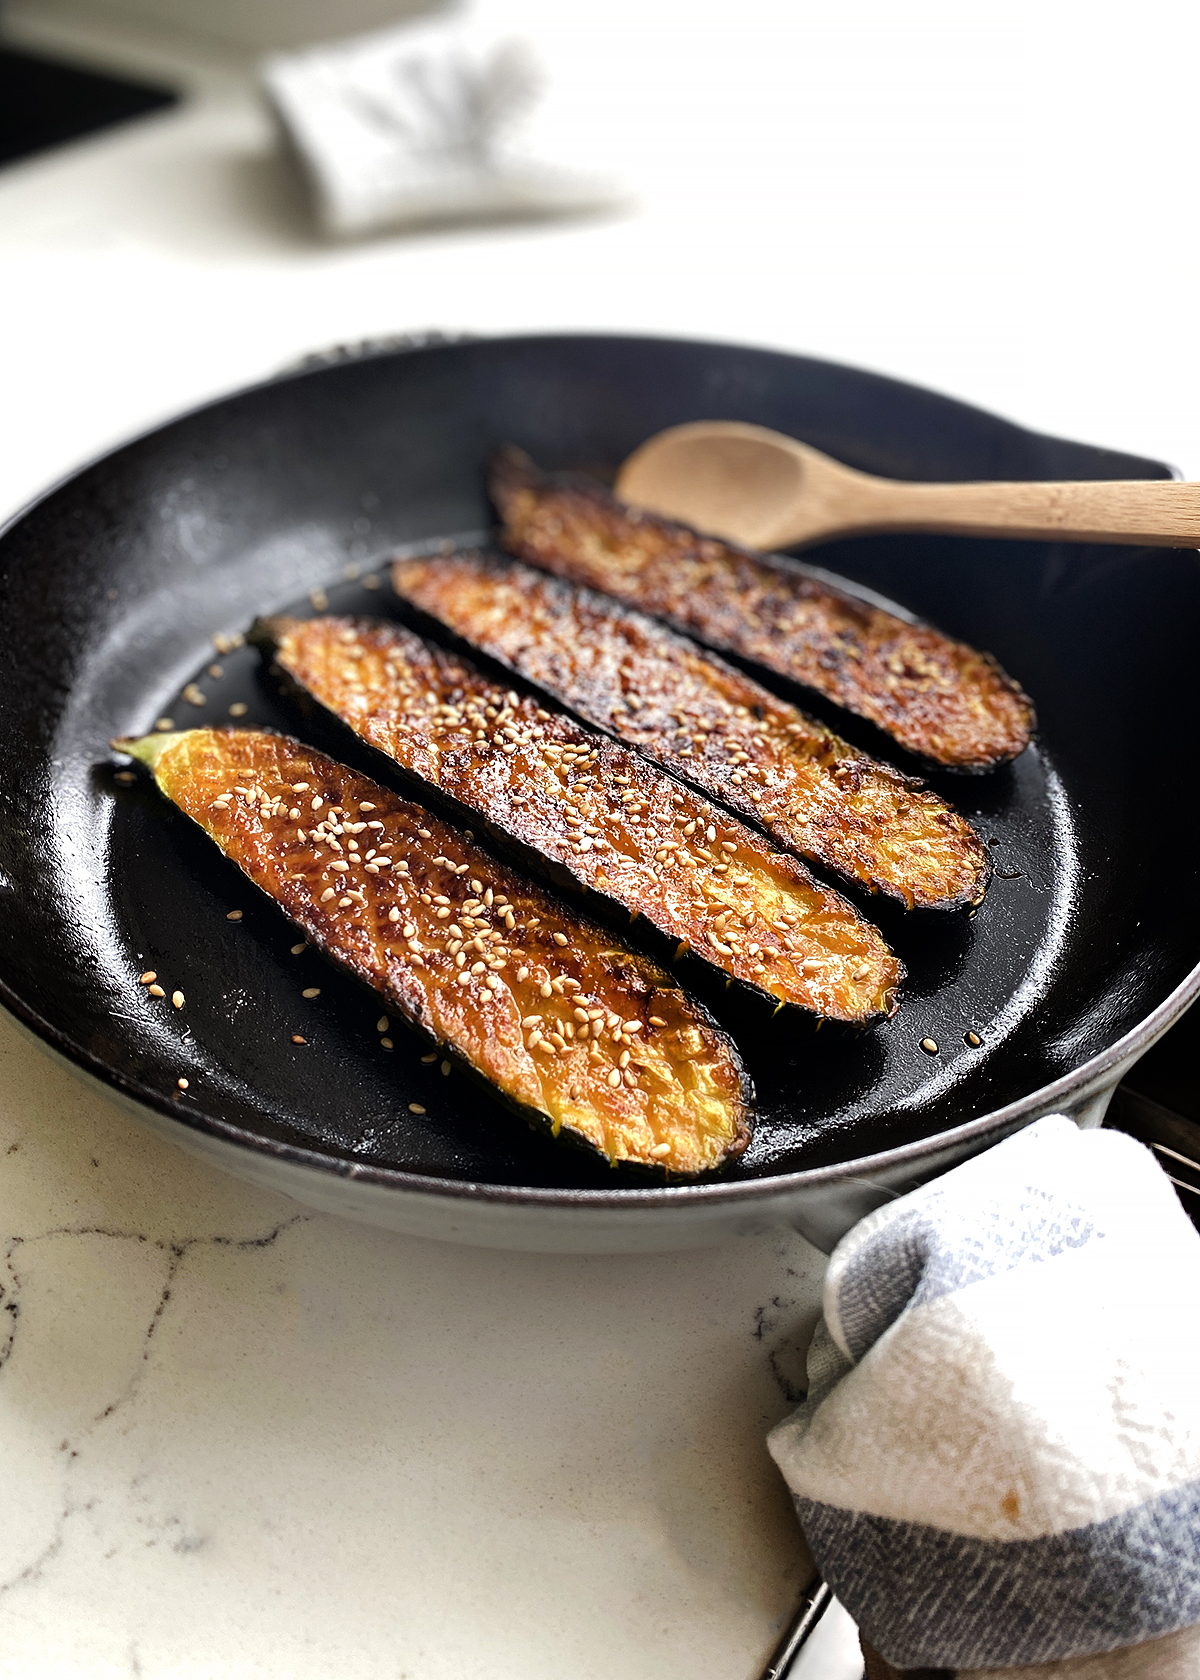 oven roasted zucchini with glaze and sesame seeds in cast iron skillet